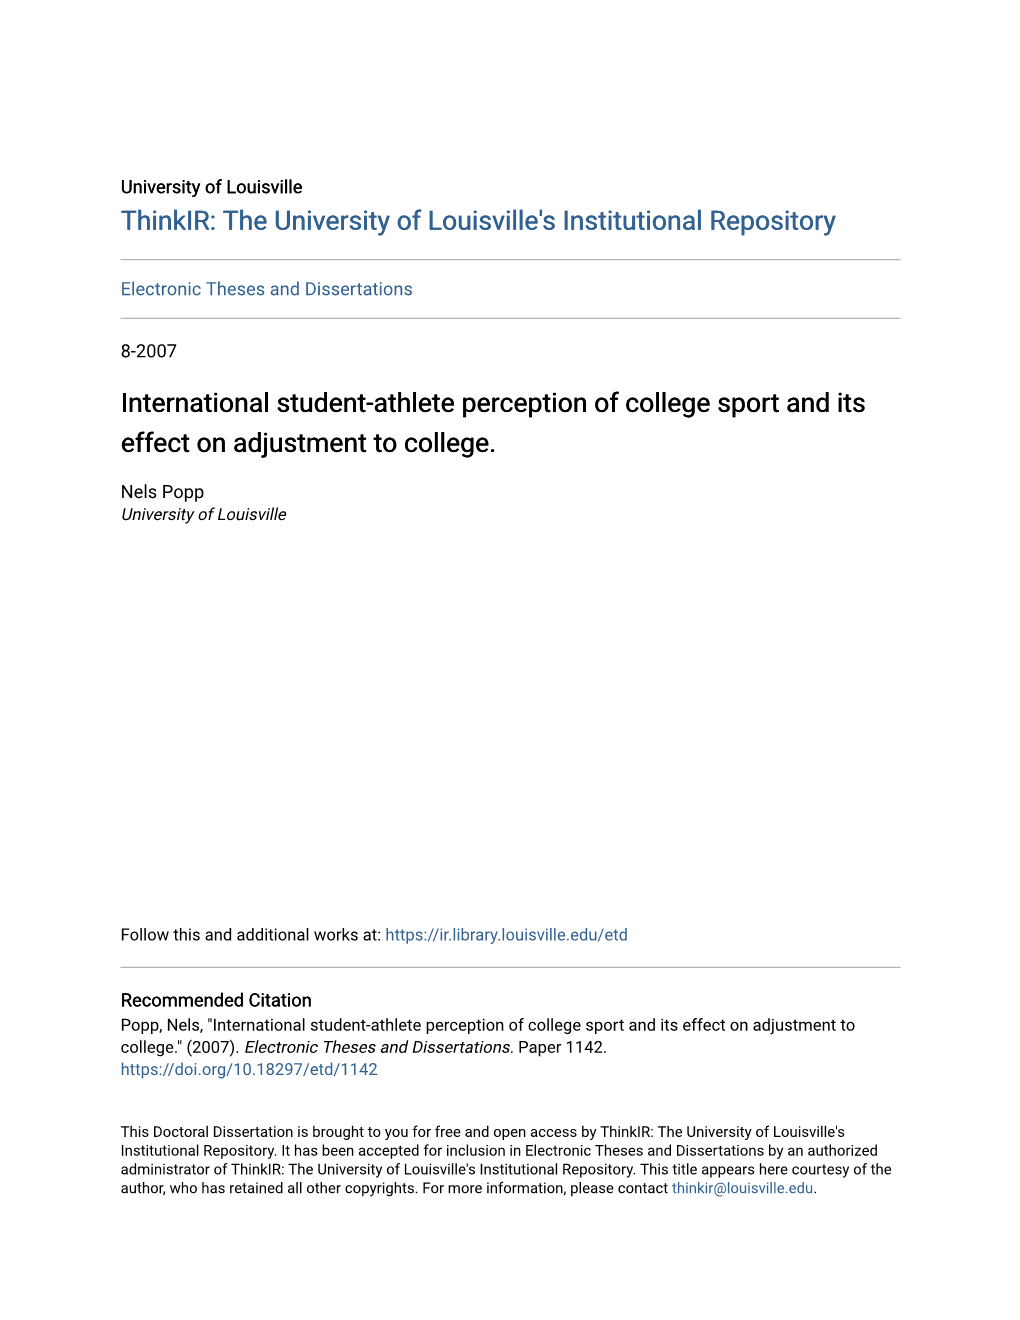 International Student-Athlete Perception of College Sport and Its Effect on Adjustment to College